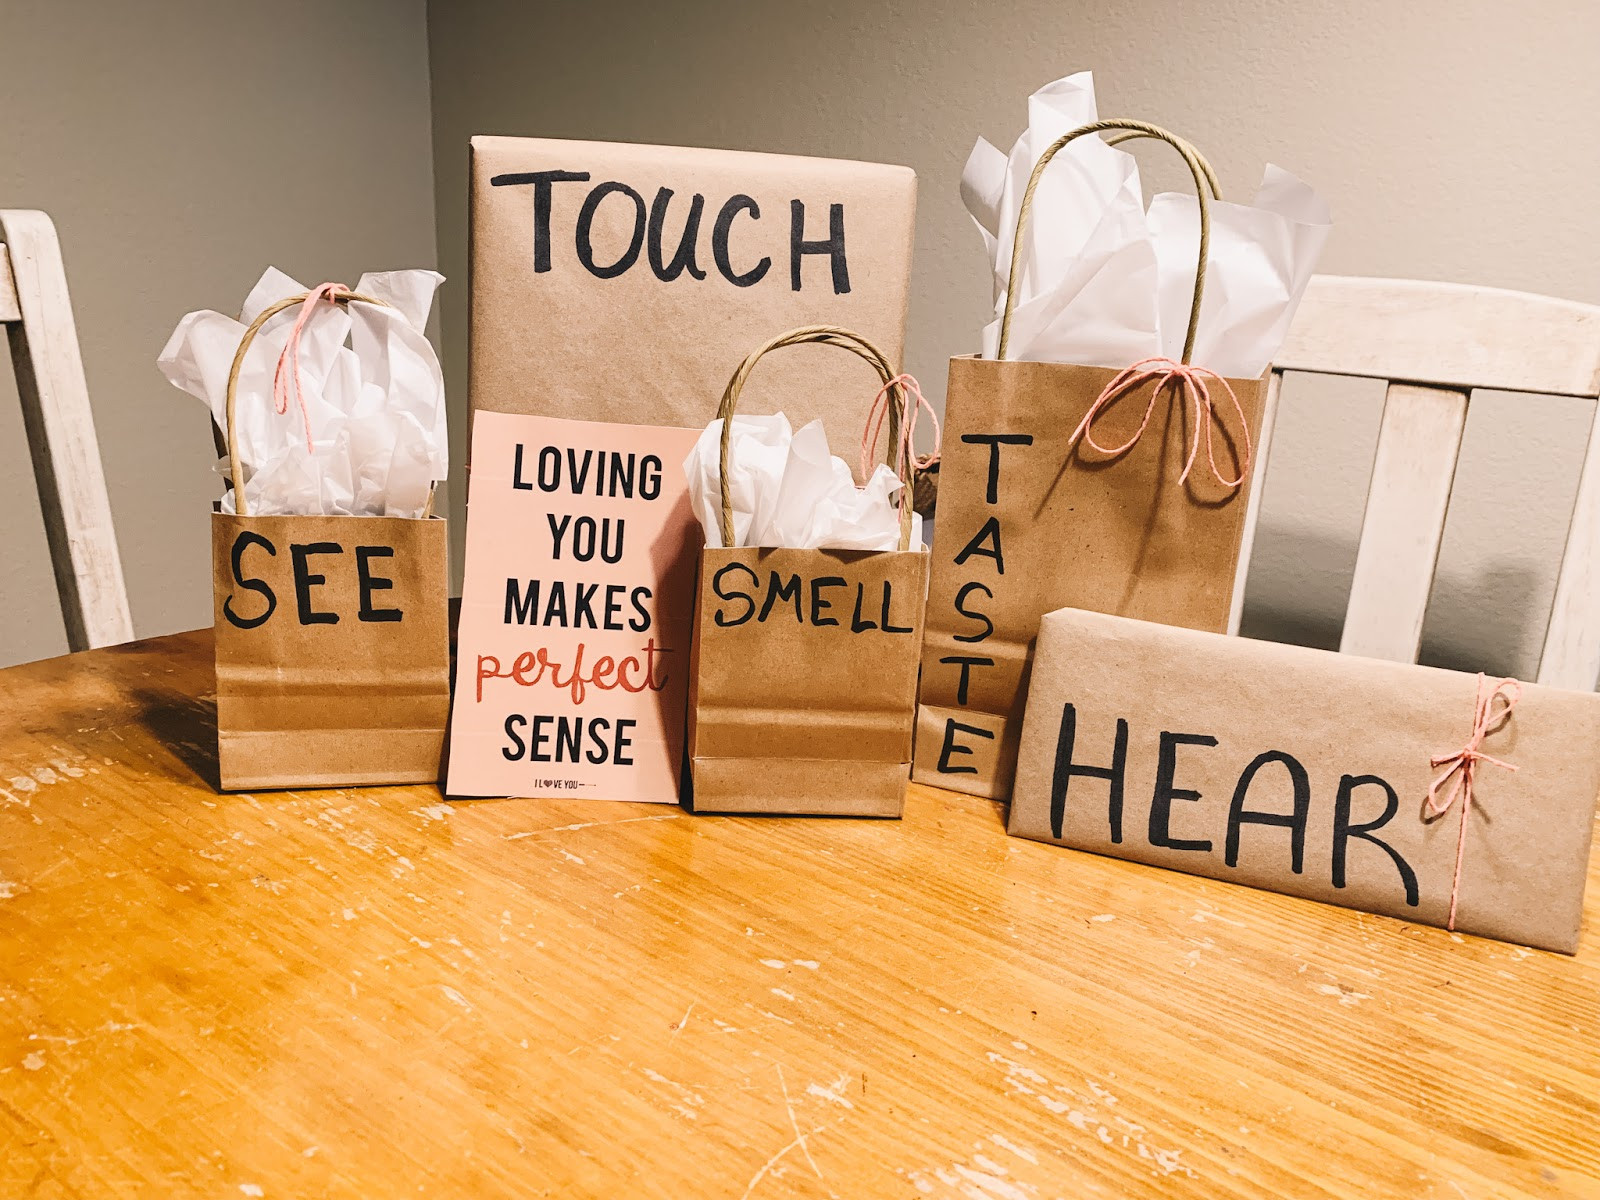 Valentines Day Ideas For Him Creative
 The 5 Senses Valentines Day Gift Ideas for Him & Her